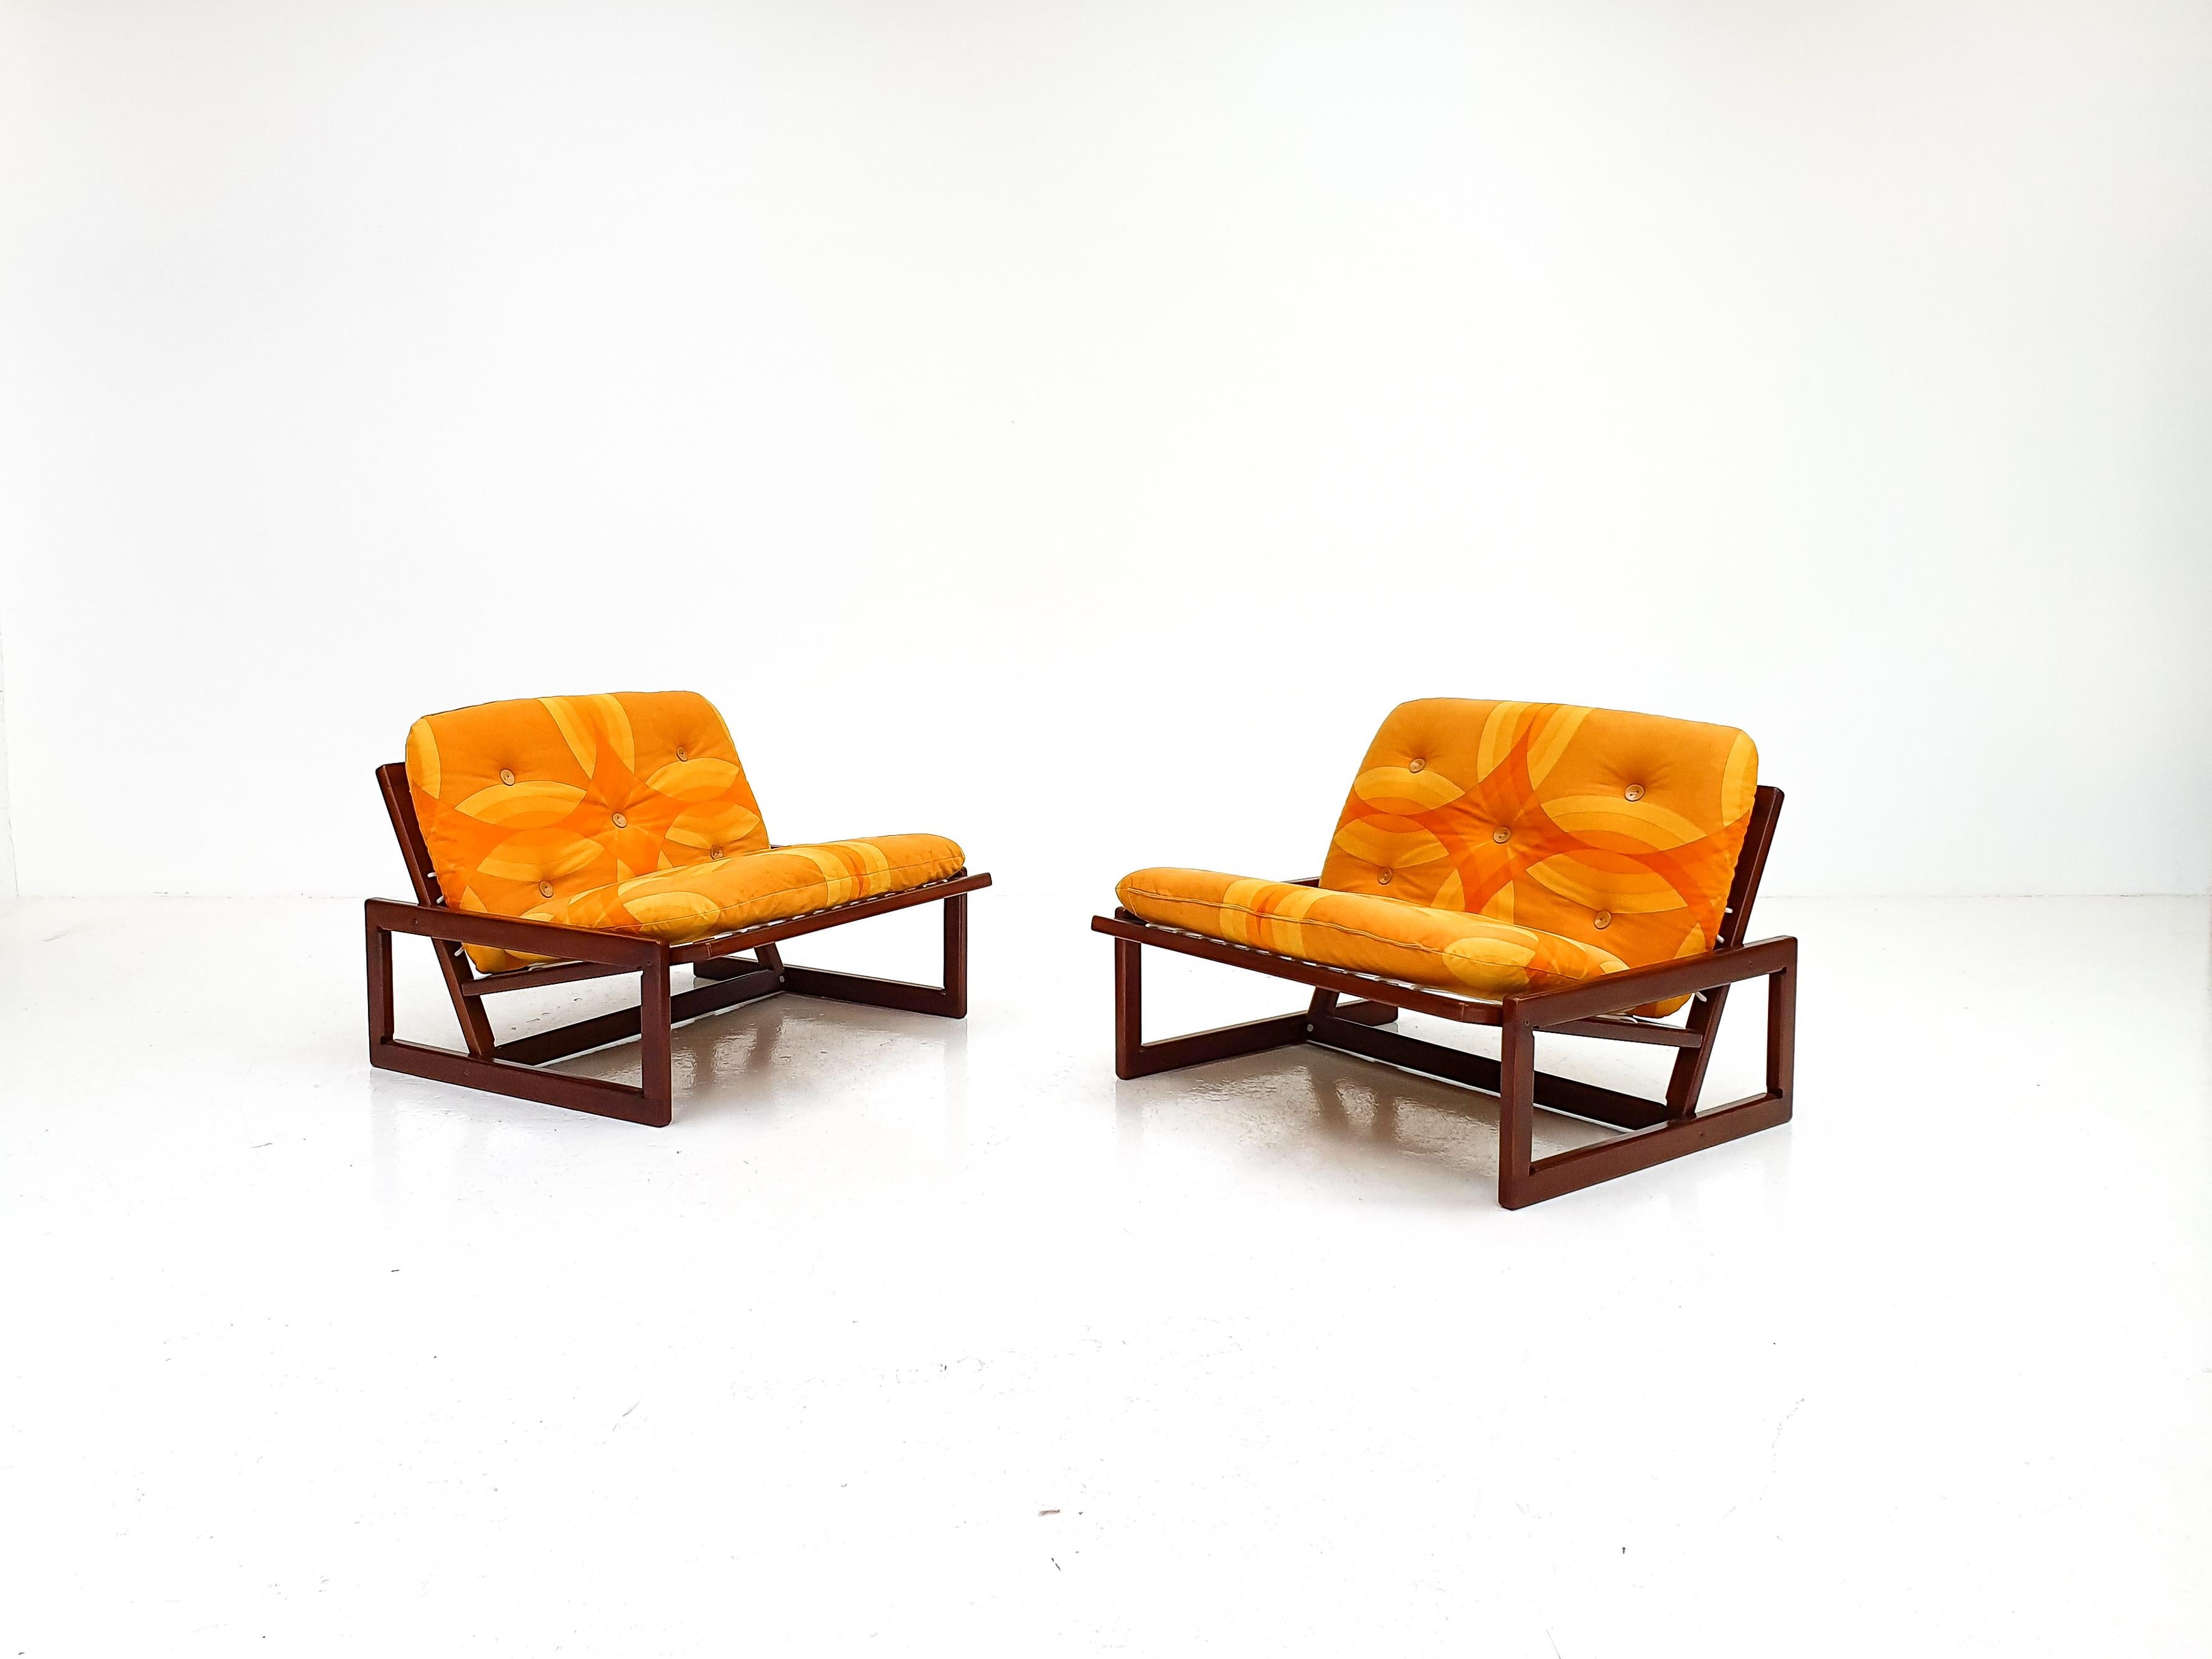 Customizable 'Carlotta' easy chairs by Afra & Tobia Scarpa for Cassina, Italy, designed 1976.

A pair of 'Carlotta' easy chairs, lacquered frames fully restored and have entirely new rope which is important with this design. 

The set presents